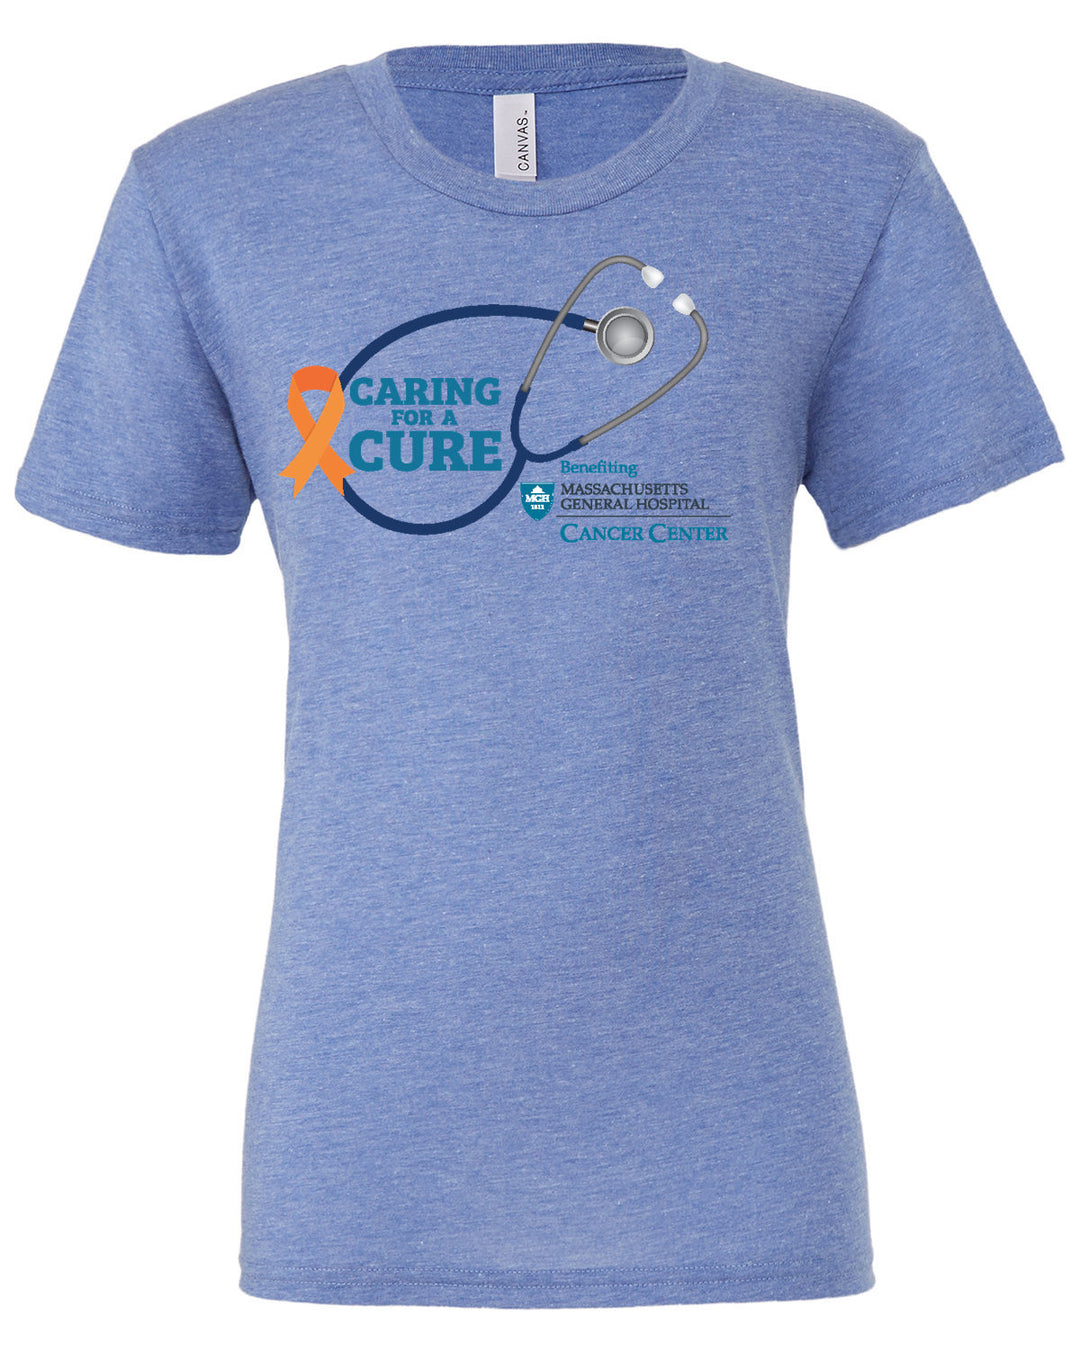 Caring for a Cure Unisex Triblend T-Shirt (3413C)